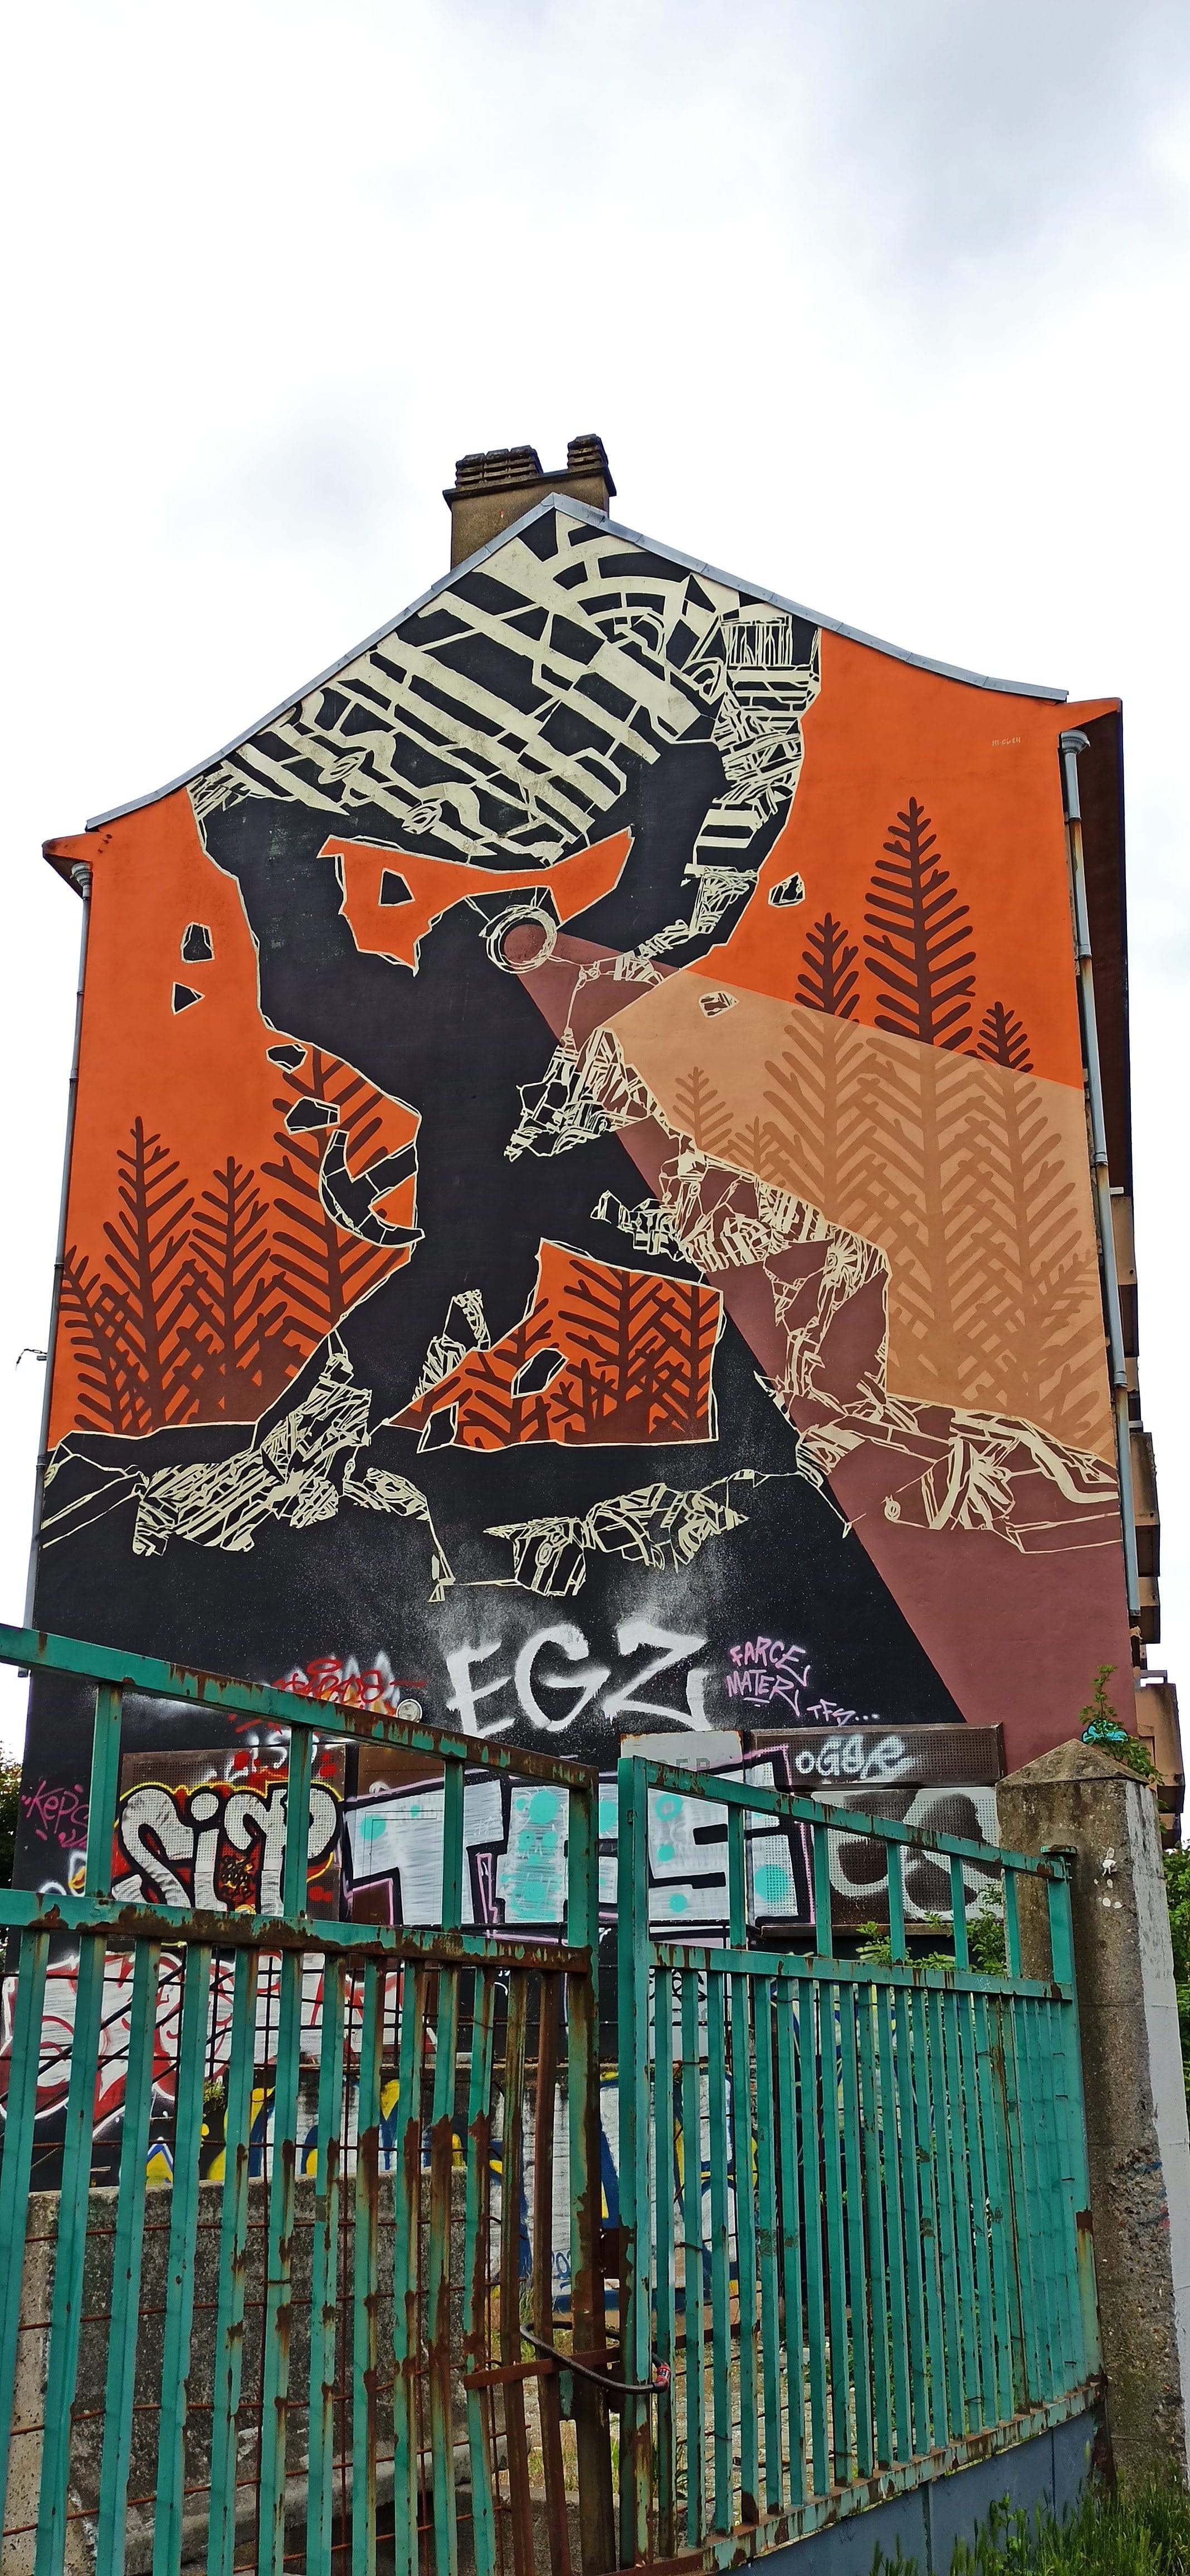 Graffiti 5274 King Kong by the artist M-CITY captured by Rabot in Lille France